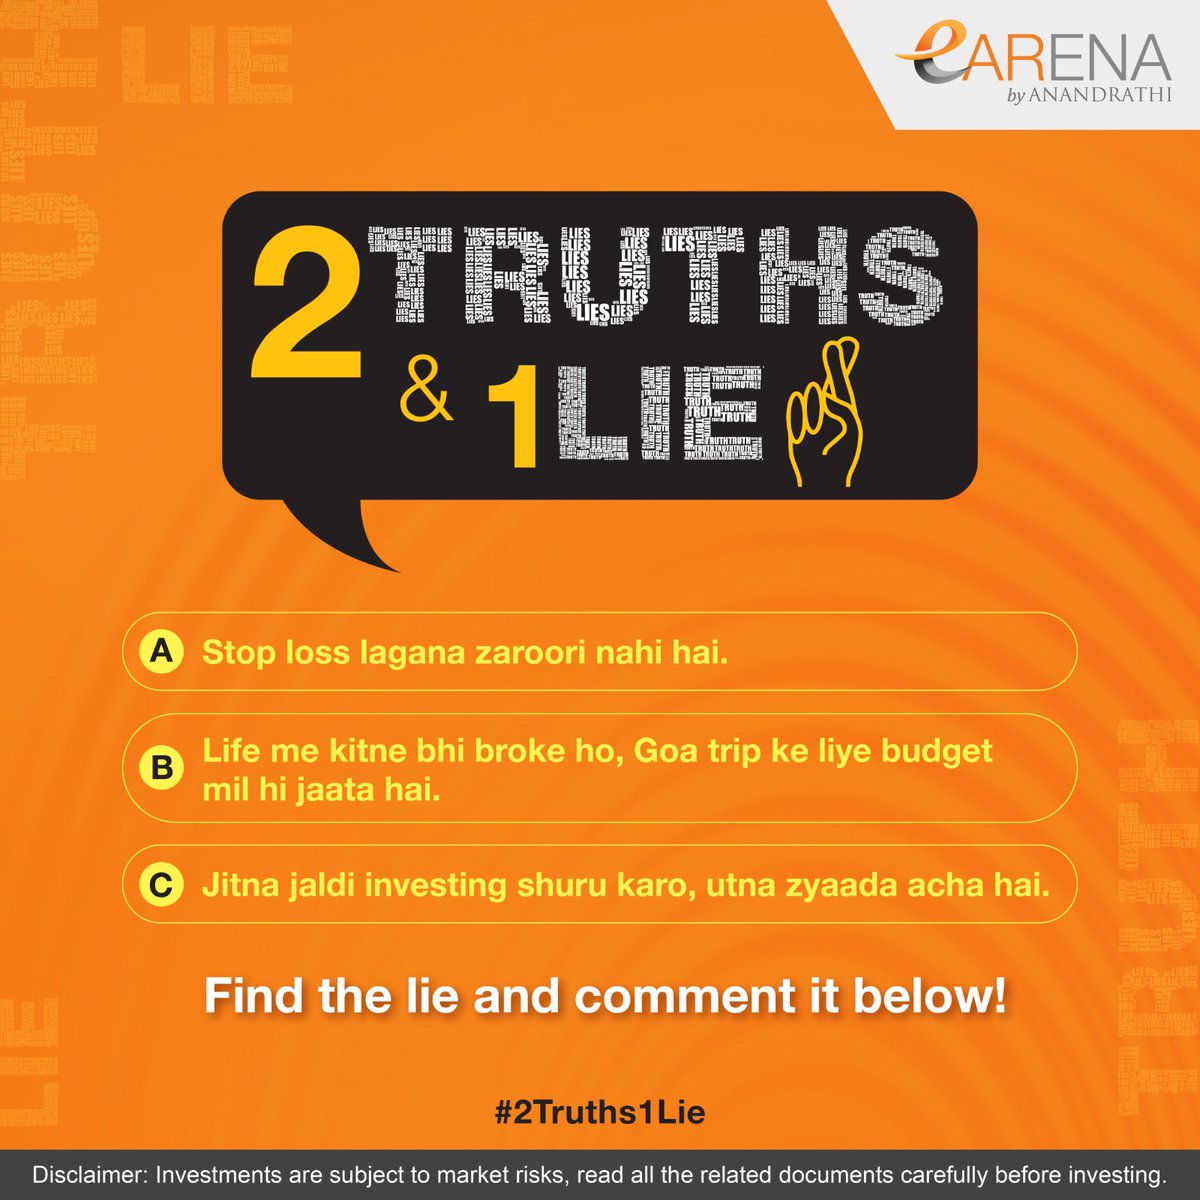 Let’s play #2Truths1Lie!! Comment with the lie that’s hiding between two truths above🤥

Hint: Goa trip aur investment plan kabhi delay nahi karte😜😜

#Goa #GoaTrip #GoGoaGone #investing #stoploss #twotruthsandalie #twotruthsonelie #game #eARENA #eARENAbyAnandRathi #AnandRathi